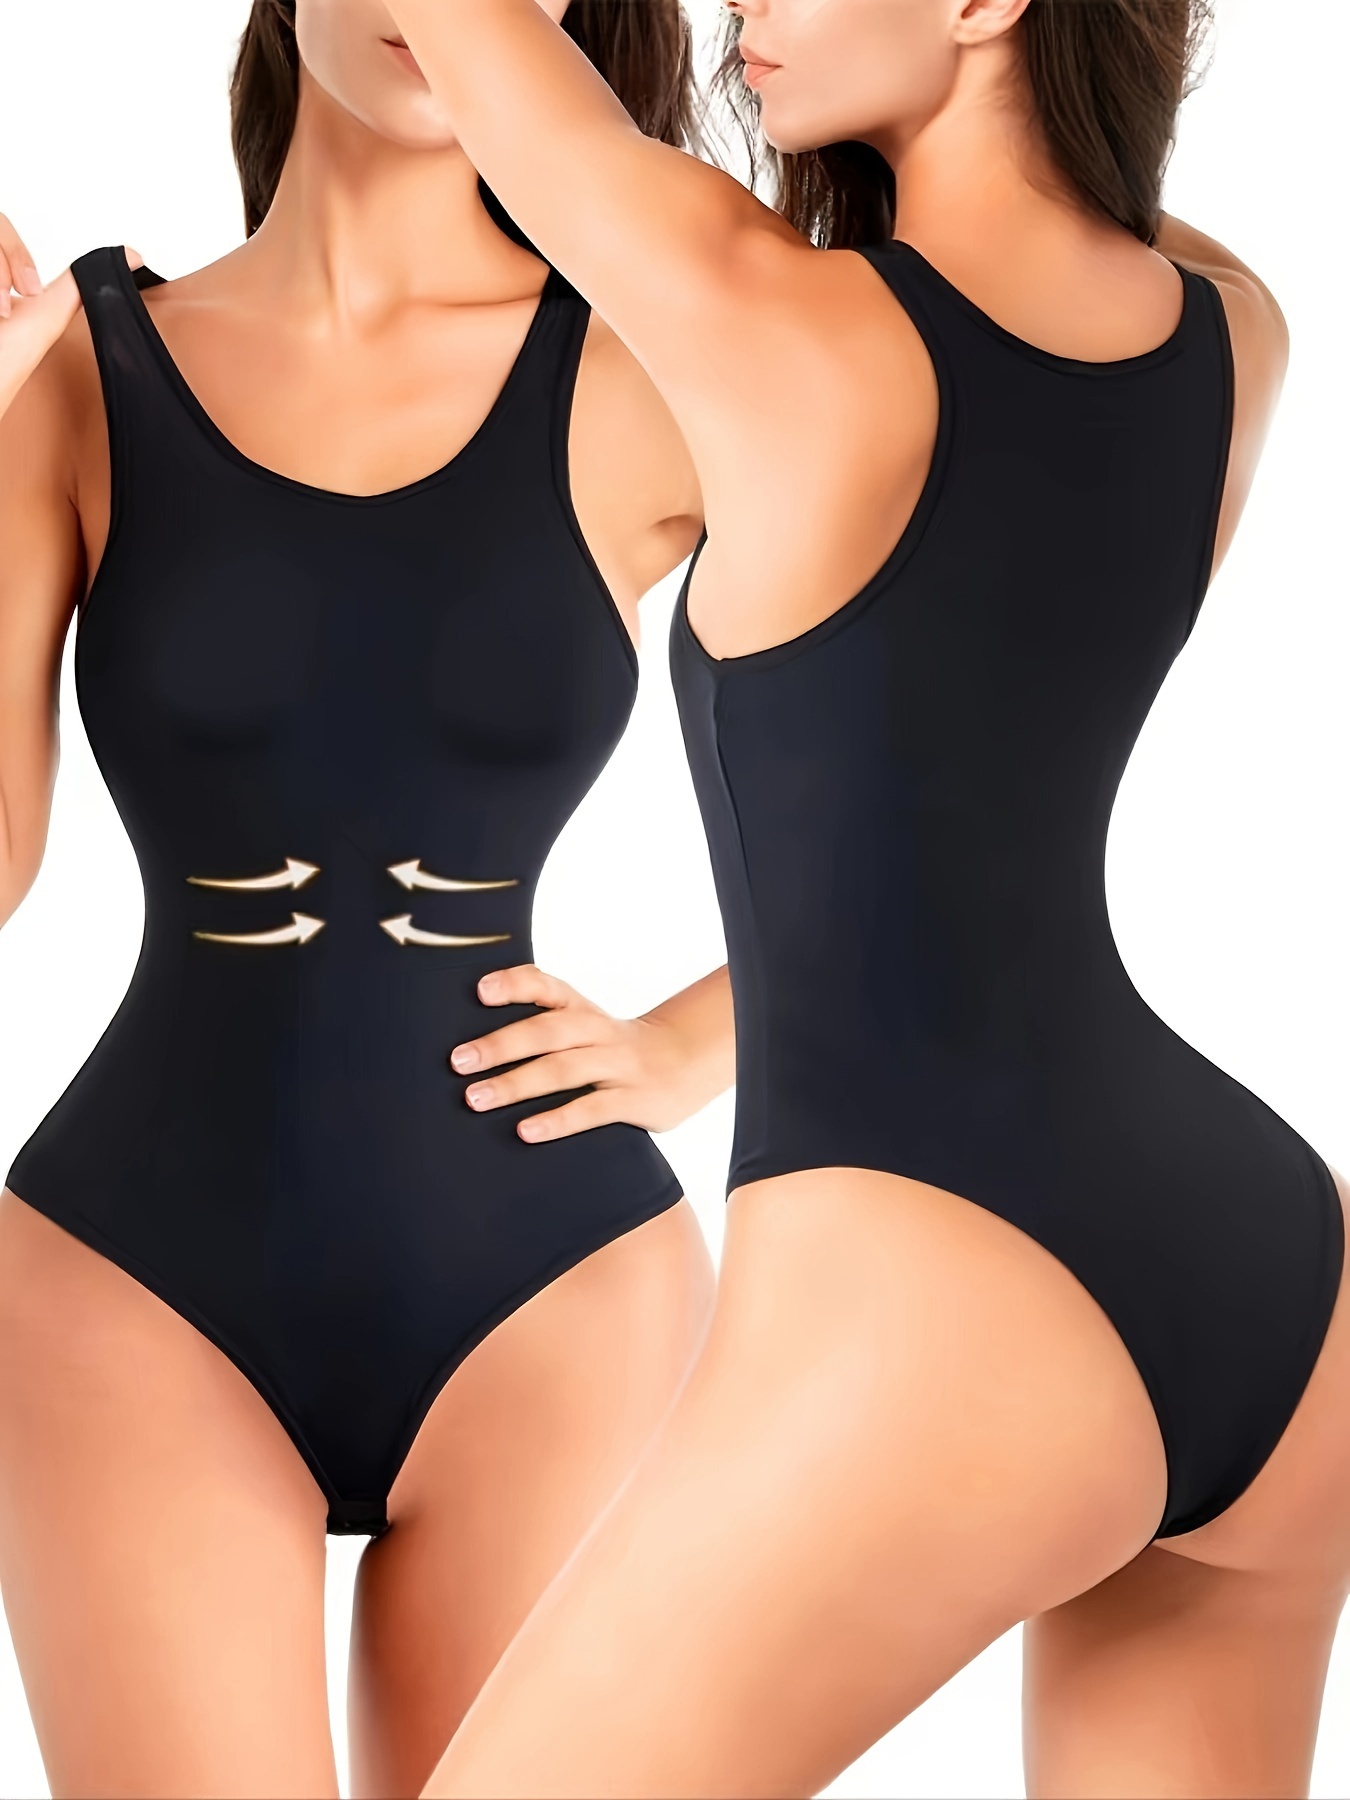 Bodysuit Anti-Slip Grip Lining Silicone Band Adjustable Straps Shapes  Curves Seamless Camisole Body Suit For Women at  Women's Clothing  store